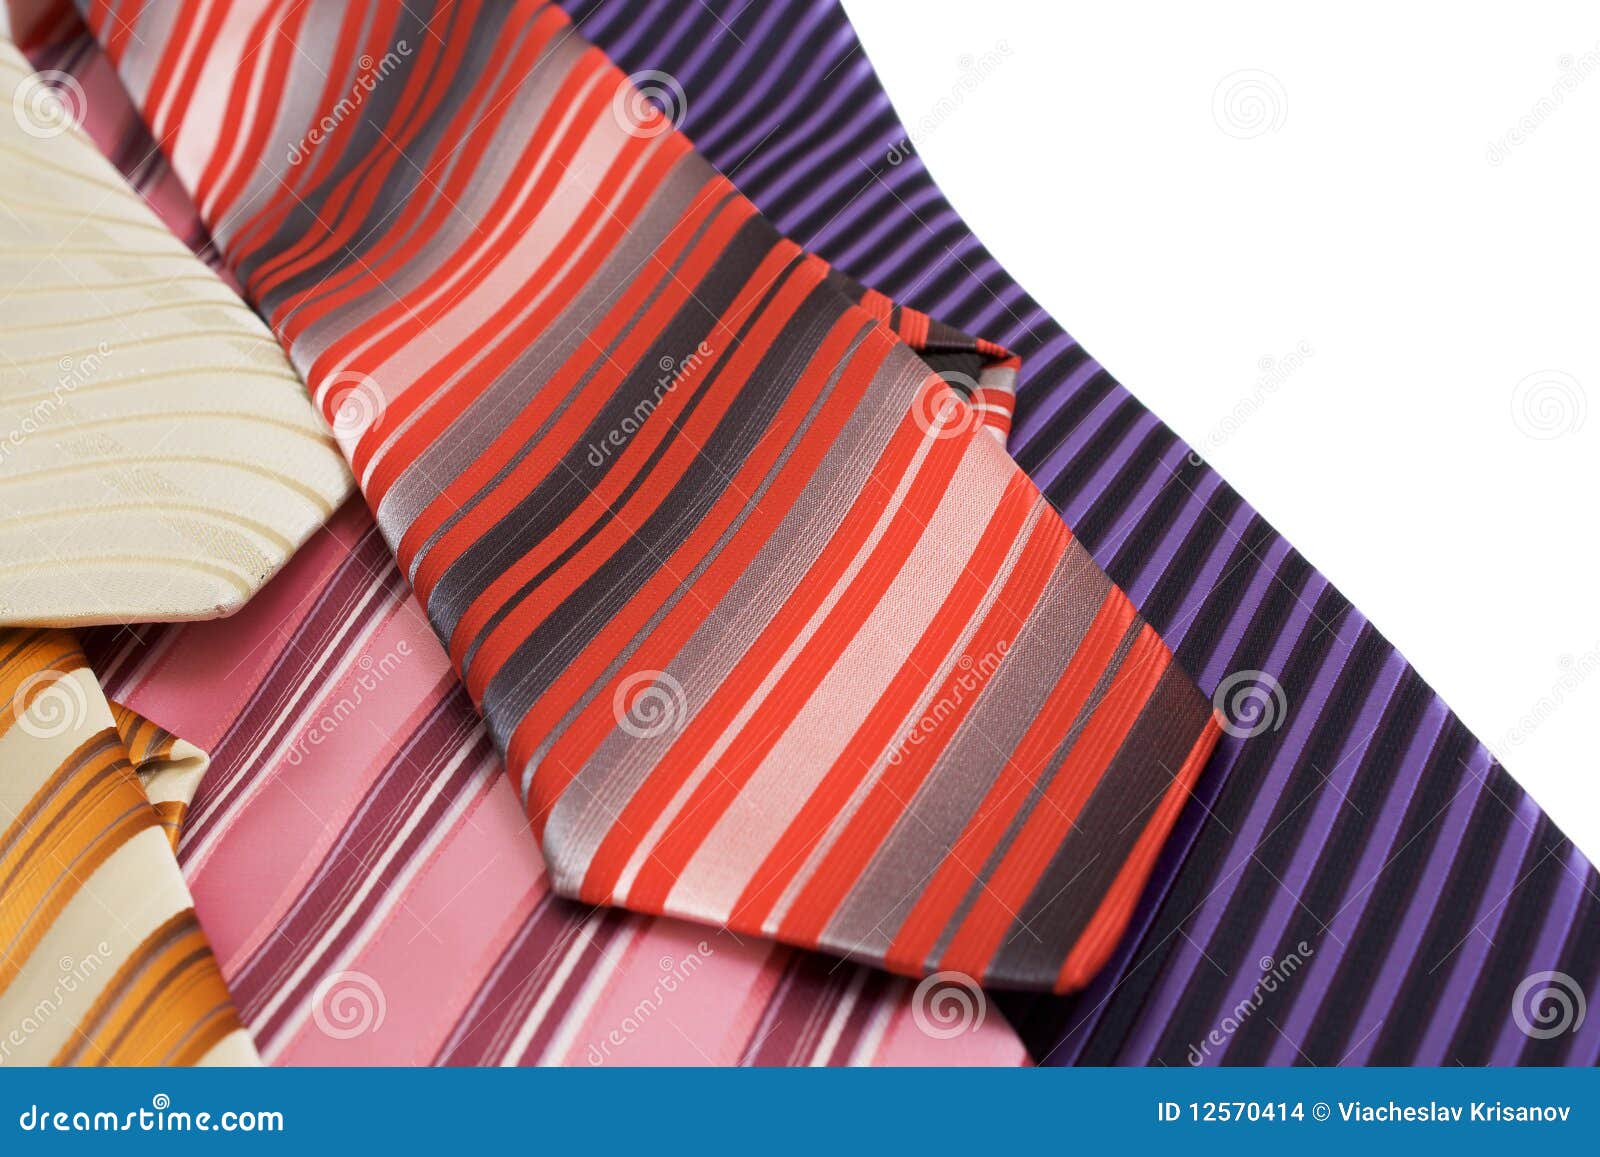 Background from ties stock photo. Image of personal, bright - 12570414